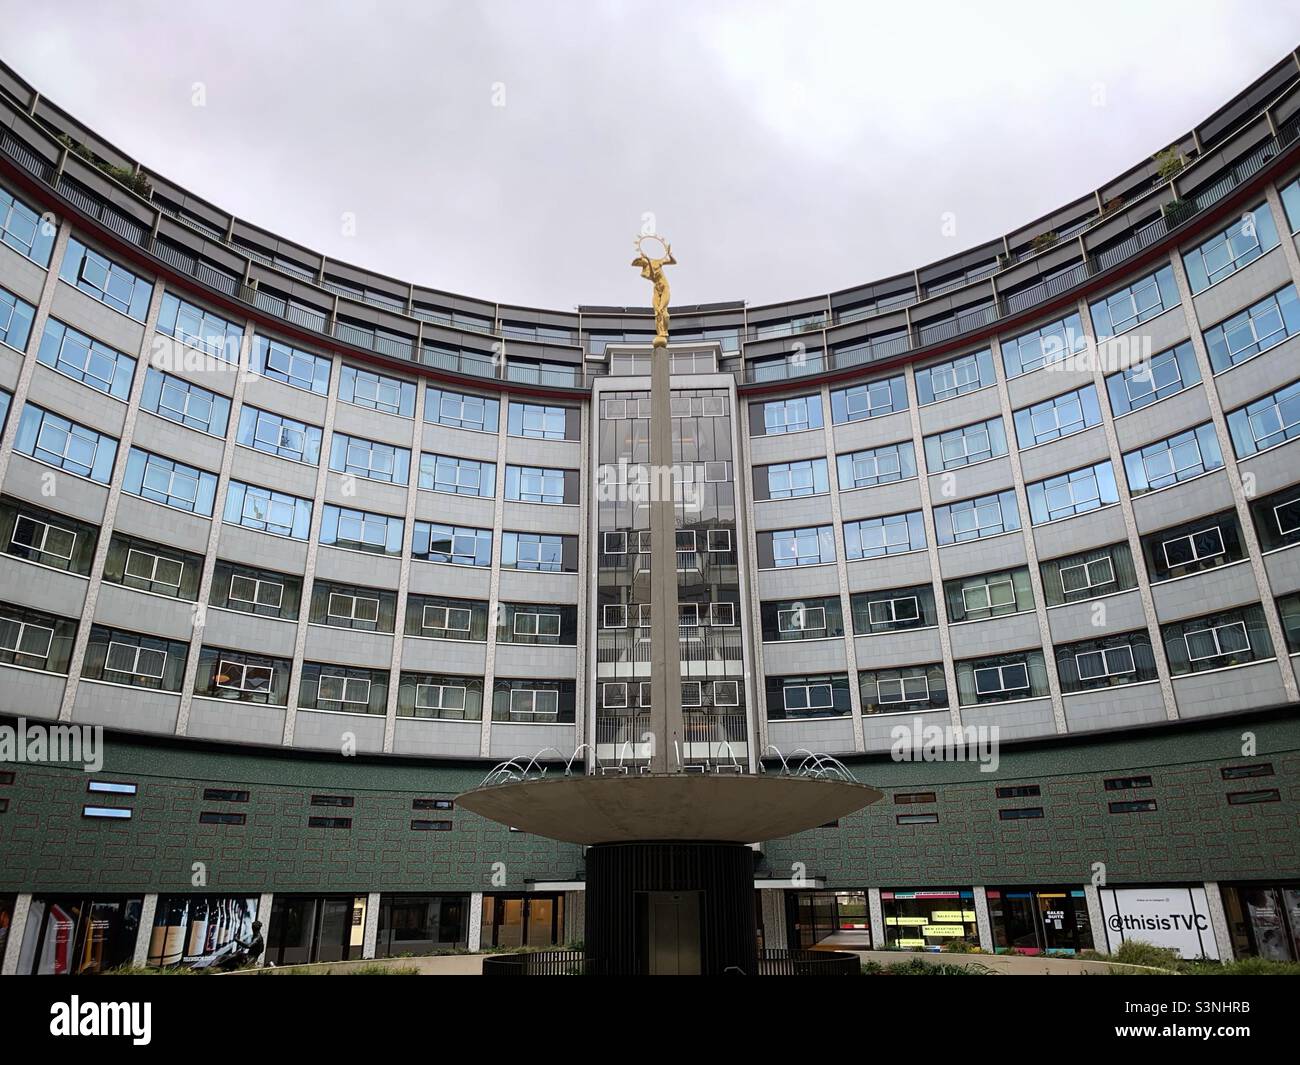 A general view of the BBC Television Centre at Wood Lane in west London. It served as the headquarters of BBC Television between 1960 and 2013. It has recently been converted to apartments. Stock Photo